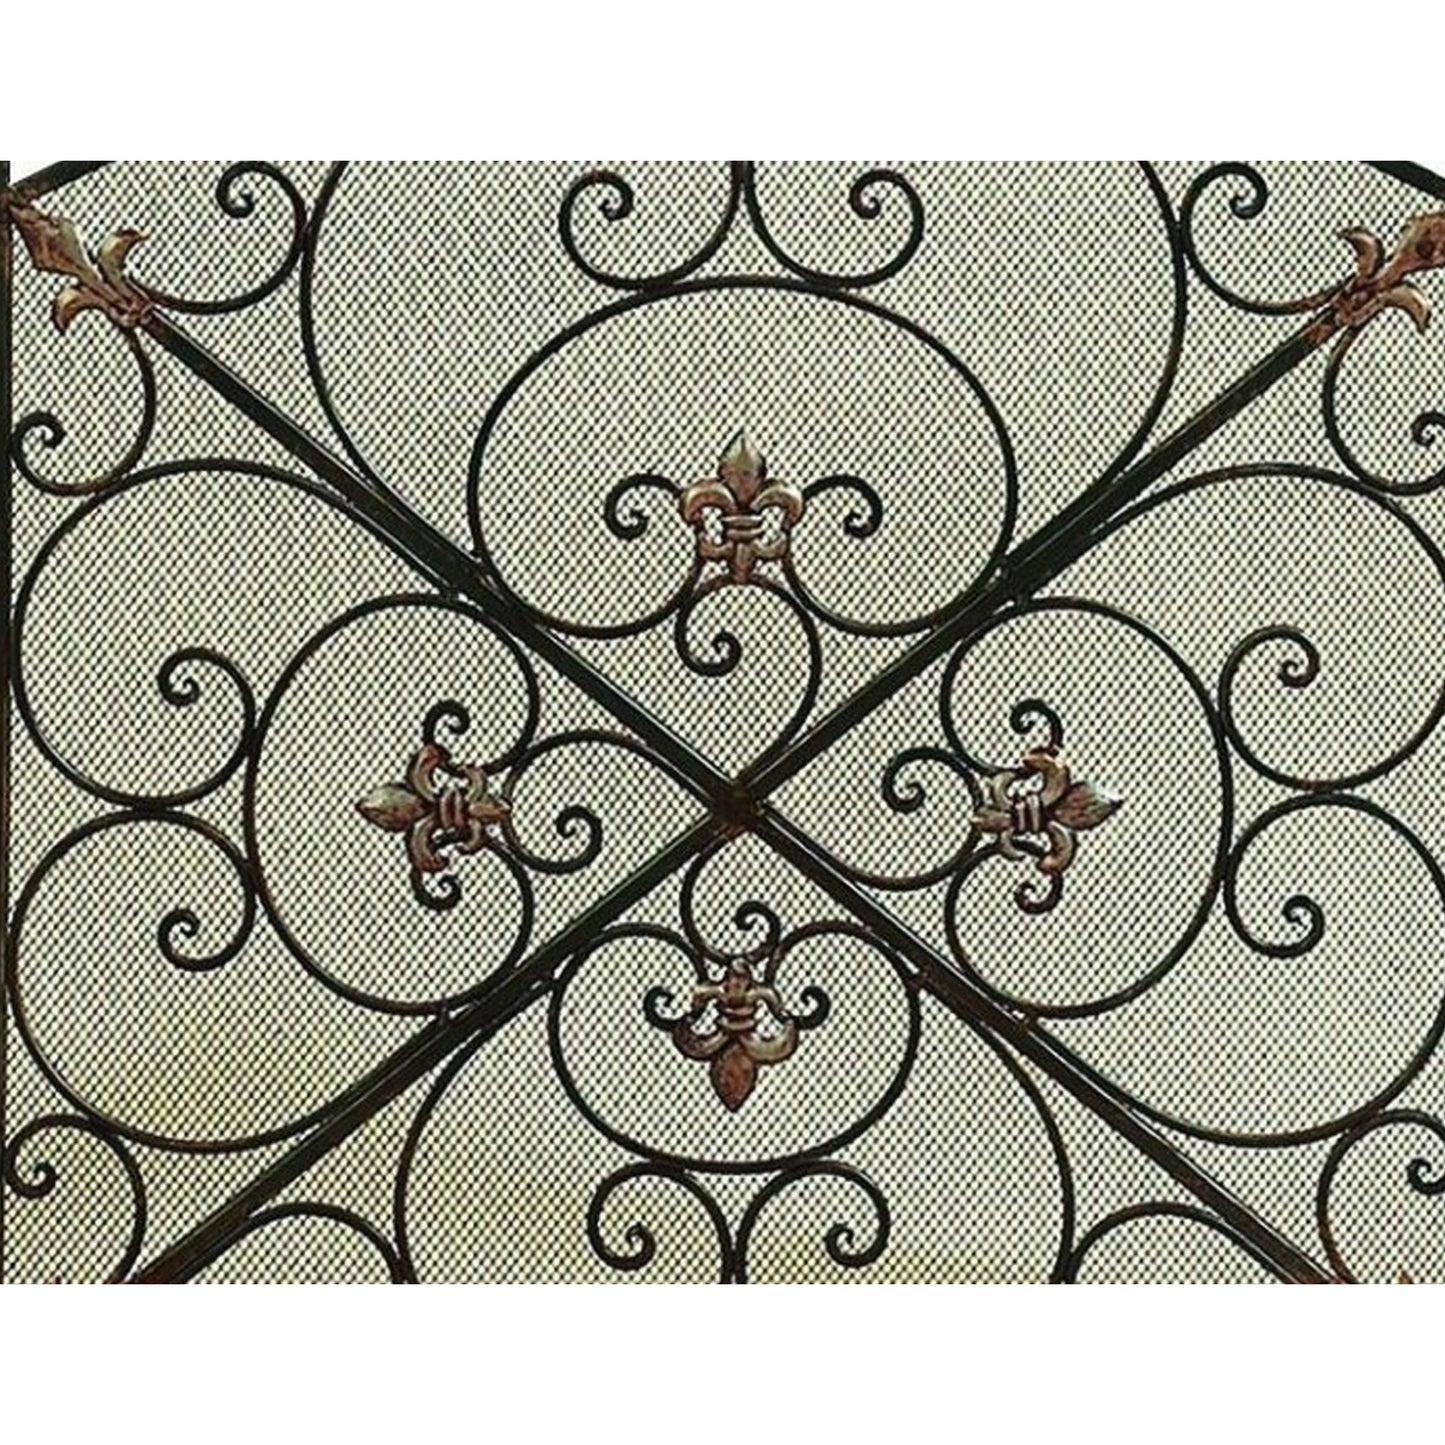 Traditional 3 Panel Metal Fire Screen With Filigree Design, Bronze, Black  The Urban Port